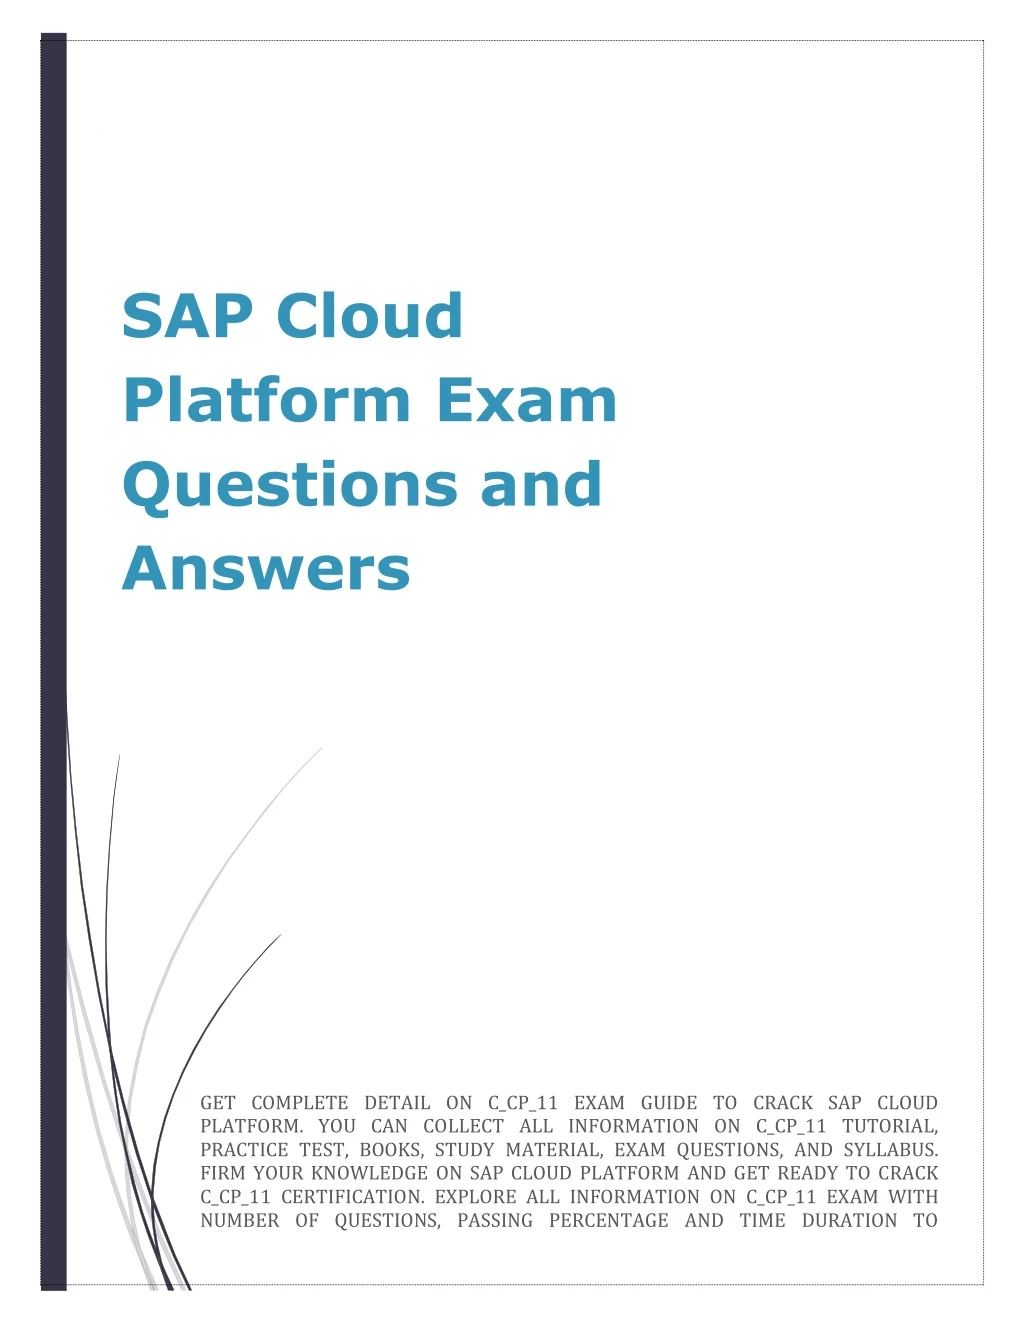 sap cloud platform exam questions and answers